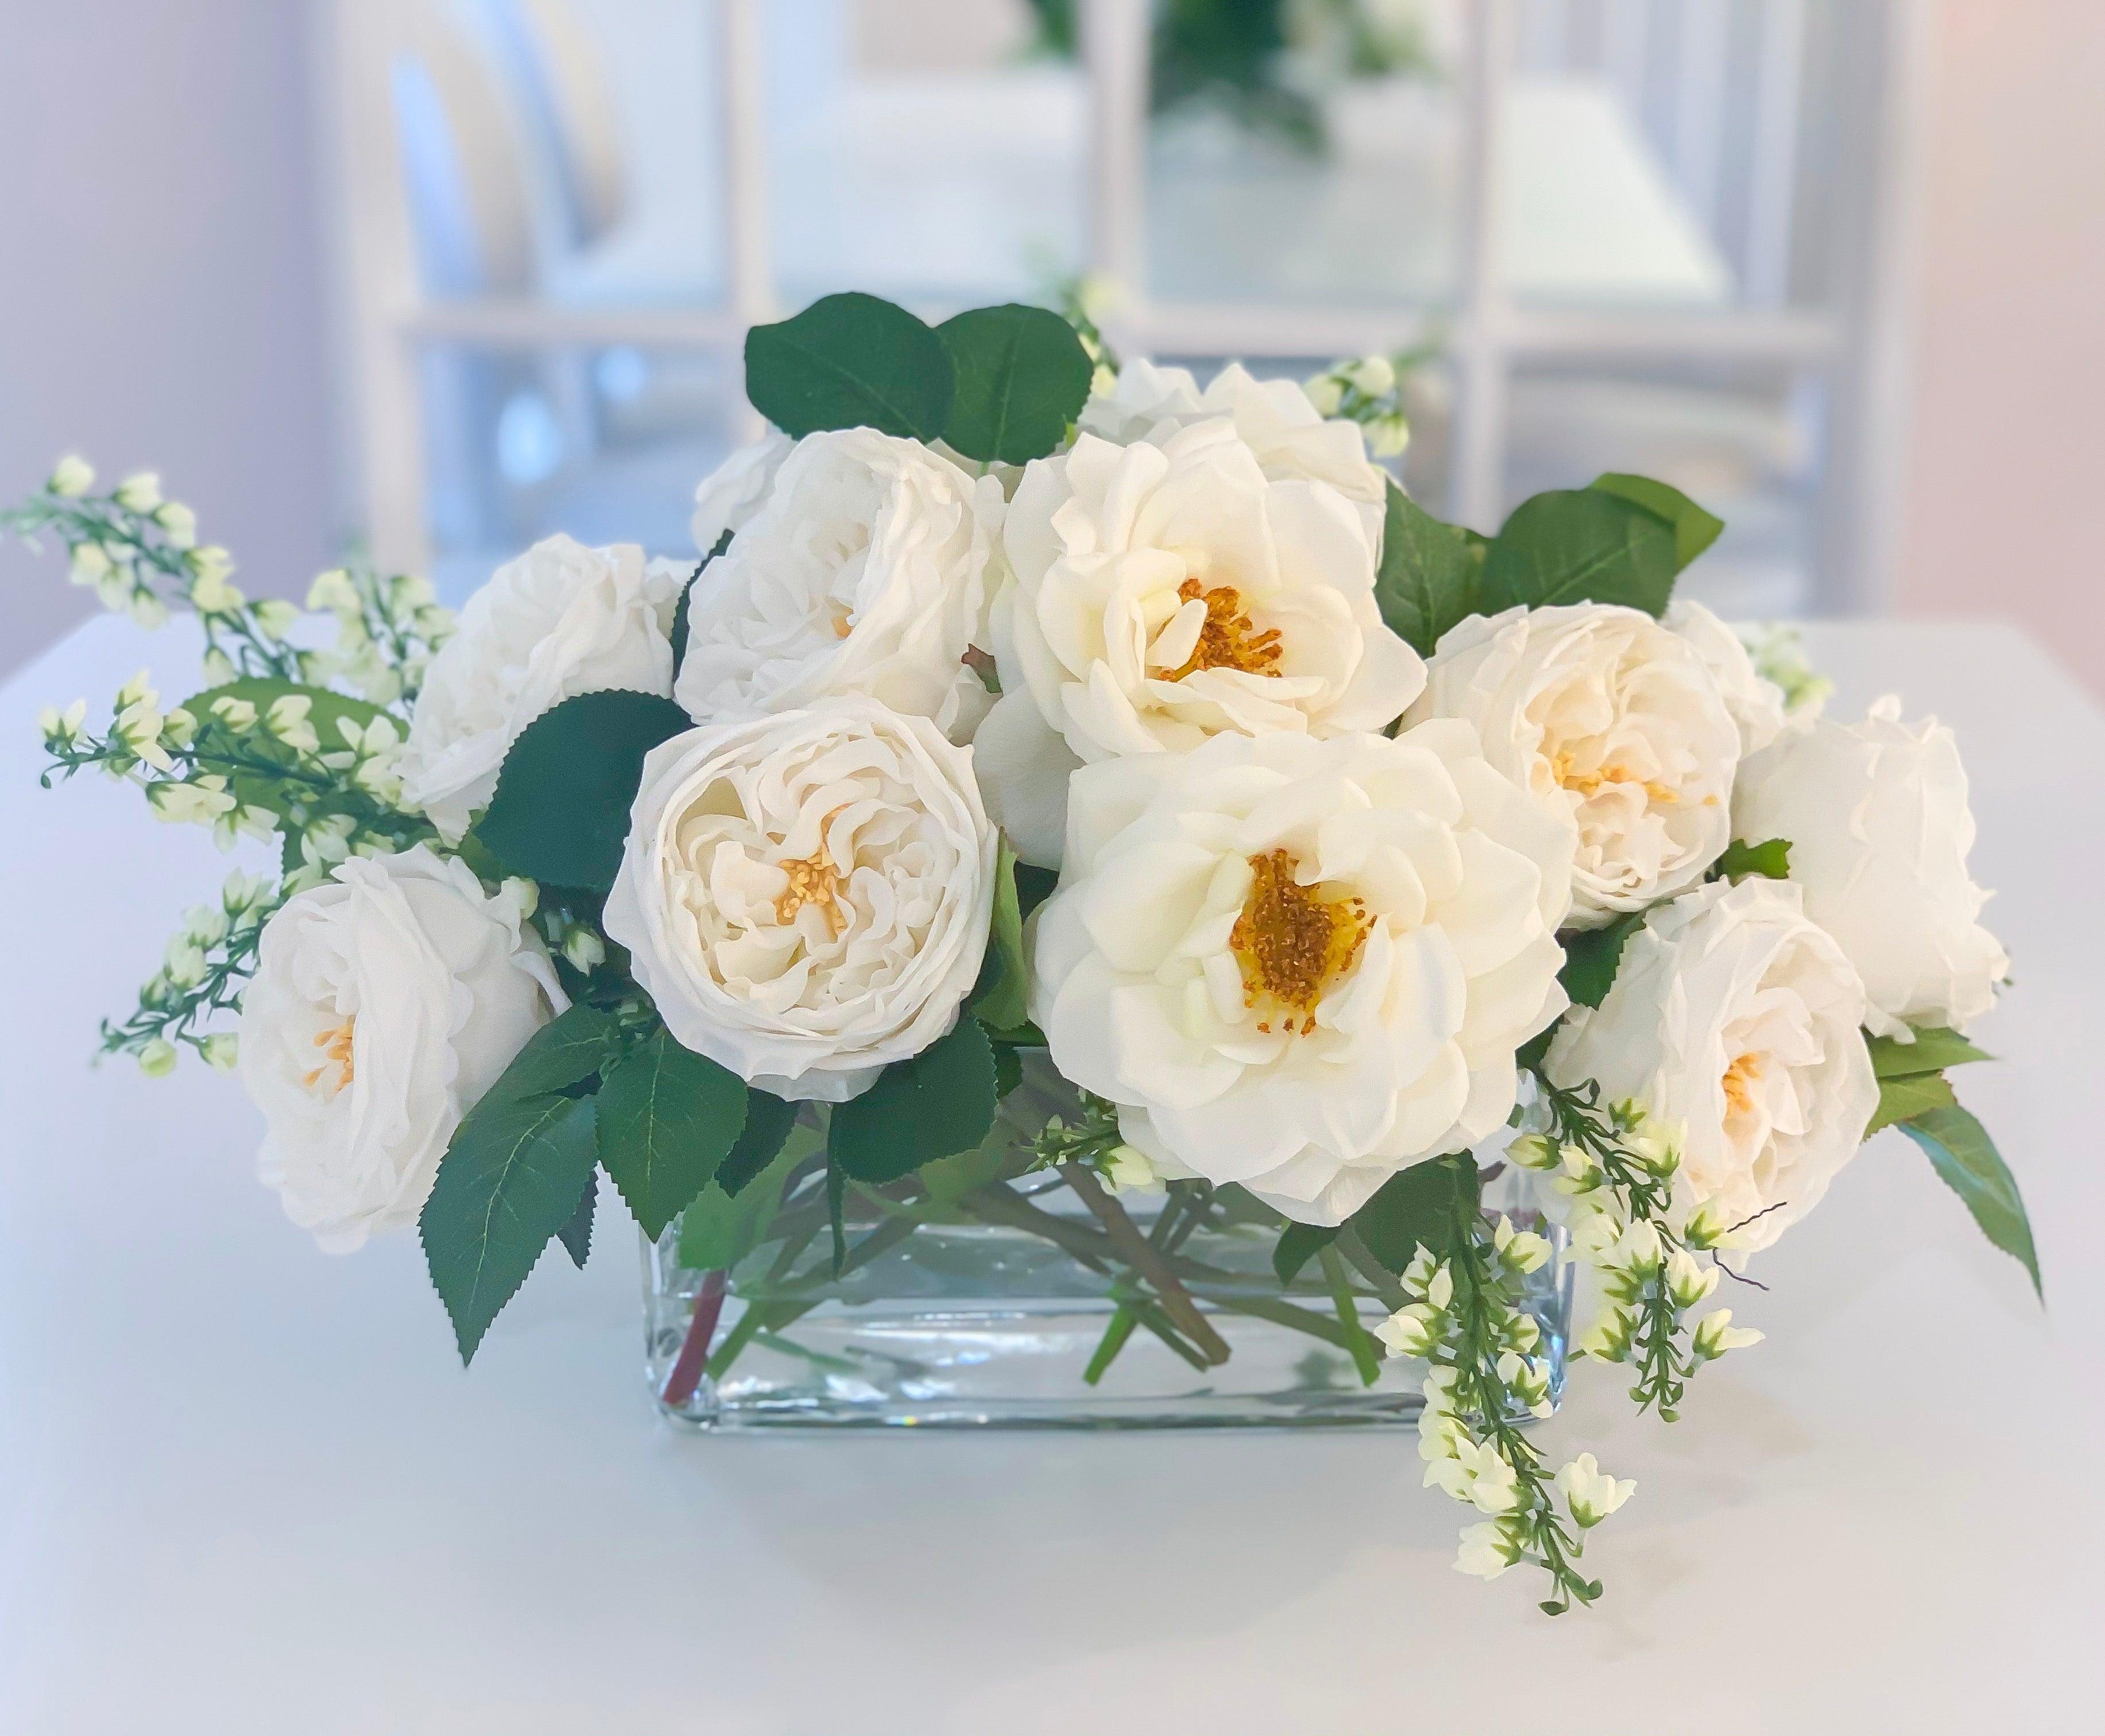 Elegant Long Centerpiece All Real Touch Flowers Arrangement - Home Decor By Flovery - Flovery